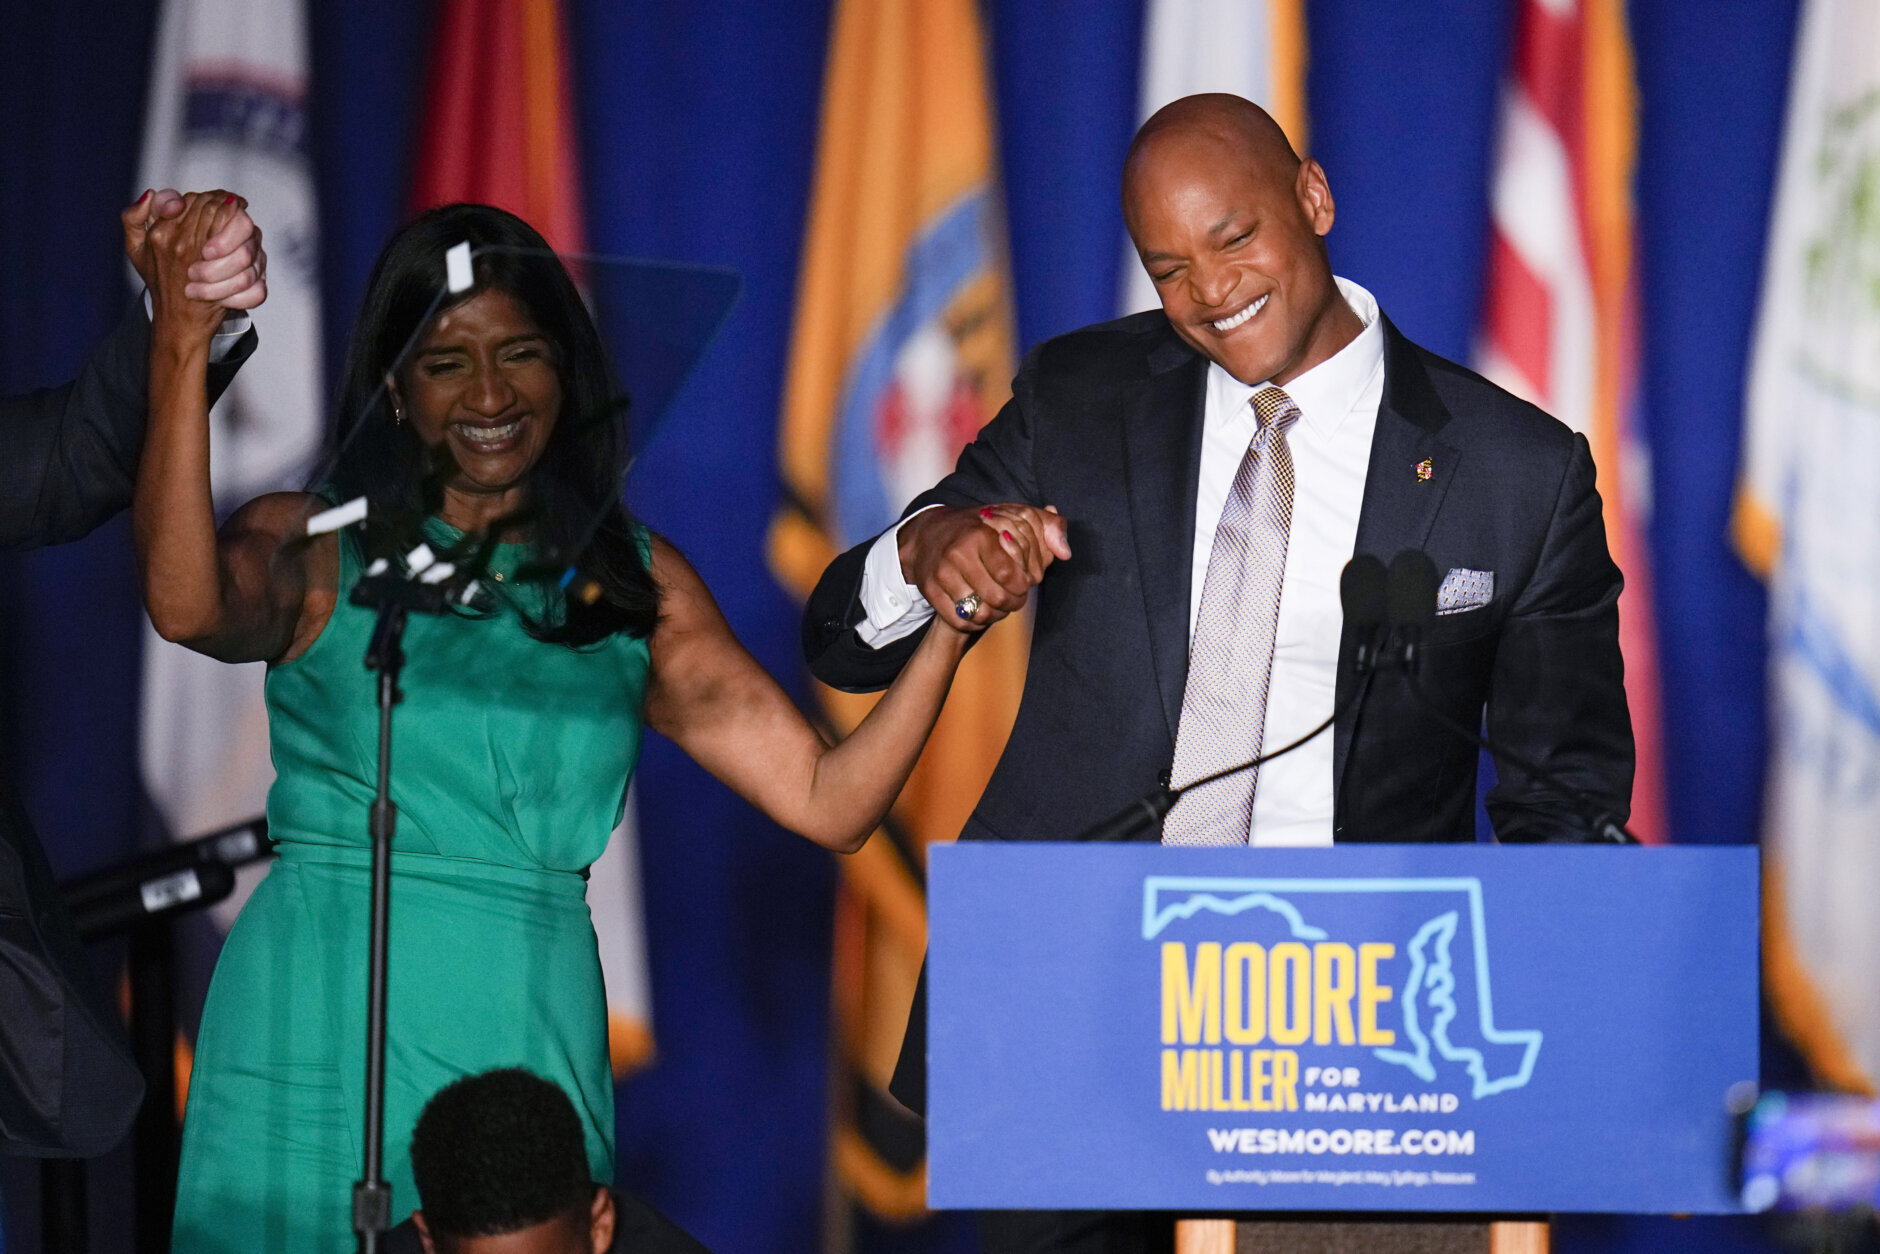 <h3>History on Election Day</h3>
<p>When Marylanders went to the polls in November, the outcome made history.</p>
<p>Democrat Wes Moore won by a landslide, on pace to become the state&#8217;s first Black governor — and just the third Black person elected governor in the U.S.</p>
<p>Moore, a bestselling author and combat veteran, has never held elected office before, but he proved a formidable candidate, beating out a crowded field of Democratic candidates in the July primary and then scoring a decisive victory over Republican Dan Cox, a Republican who embraced former President Donald Trump and his 2020 election conspiracies.</p>
<p>Moore offered up an optimistic, bipartisan vision in his victory speech, and his big win augurs change in Annapolis. After eight years with moderate Republican Larry Hogan at the helm, Democrats will once again have unified control of the executive and legislative branches.</p>
<p>History was made in other ways on Election Day: Moore&#8217;s running mate, Aruna Miller, is the first Asian American elected statewide in Maryland. Anthony Brown, a former lieutenant governor, who has served three terms in Congress, was elected the first Black attorney general in the state&#8217;s history, and Brooke Lierman will be the state&#8217;s first female comptroller.</p>
<p>The local races marked a turning of the tides in other ways. In Montgomery County, where two seats were added to the county council, <a href="https://wtop.com/montgomery-county/2022/12/women-are-the-new-majority-on-the-montgomery-co-council/" target="_blank" rel="noopener">women now make up a majority of the 11-member body</a> in what officials say is also the most racially diverse council in the county&#8217;s history.</p>
<p>In neighboring Prince George&#8217;s County, the election ushered in a younger, more progressive county council, whose new members <a href="https://wtop.com/prince-georges-county/2022/12/new-prince-georges-council-leaders-call-this-a-new-day/" target="_blank" rel="noopener">pledged a &#8220;new day&#8221; for the council</a> that would be more transparent and receptive to residents’ concerns on issues that include sprawling development projects.</p>
<p>And in D.C., Mayor Muriel Bowser <a href="https://wtop.com/dc/2022/06/mayor-of-washington-dc-faces-formidable-primary-challenge/" target="_blank" rel="noopener">fended off a challenge in the summer’s Democratic primary</a> and <a href="https://wtop.com/dc/2022/11/2022-dc-election-bowser-seeks-third-term-as-dc-mayor/" target="_blank" rel="noopener">cruised to reelection in November</a> — becoming the first three-term D.C. mayor since “Mayor for Life” Marion Barry.</p>
